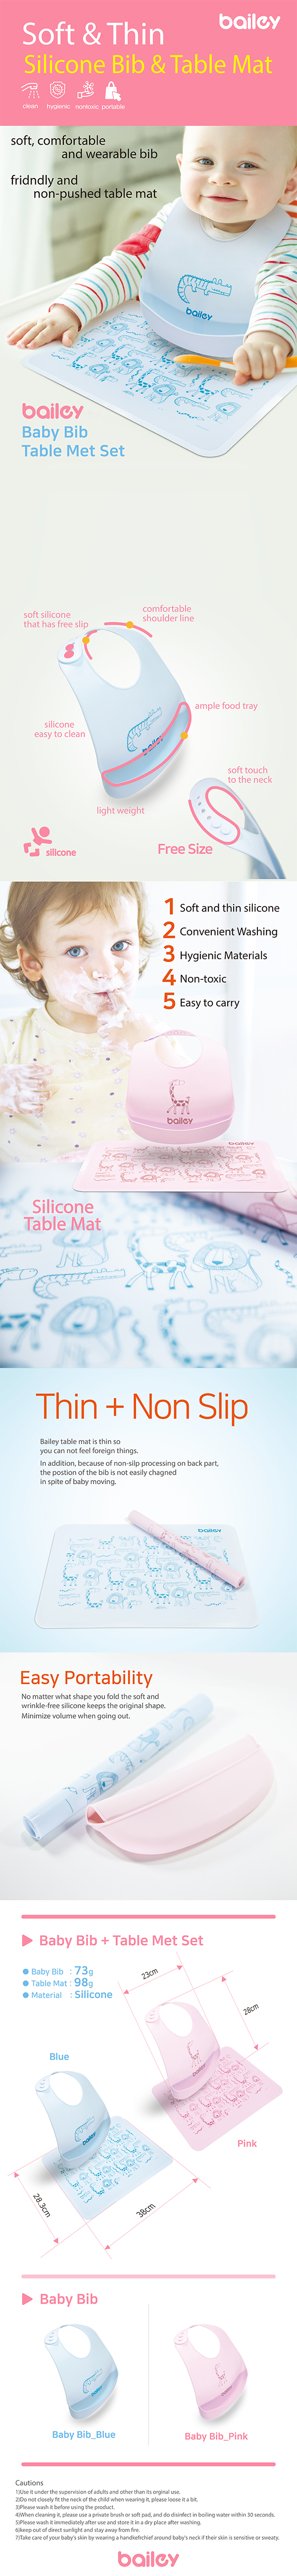 Bailey Baby Silicone Bib and Silicone Table Mat features a wide, soft, food-safe pocket to make mealtime a little less messy. 